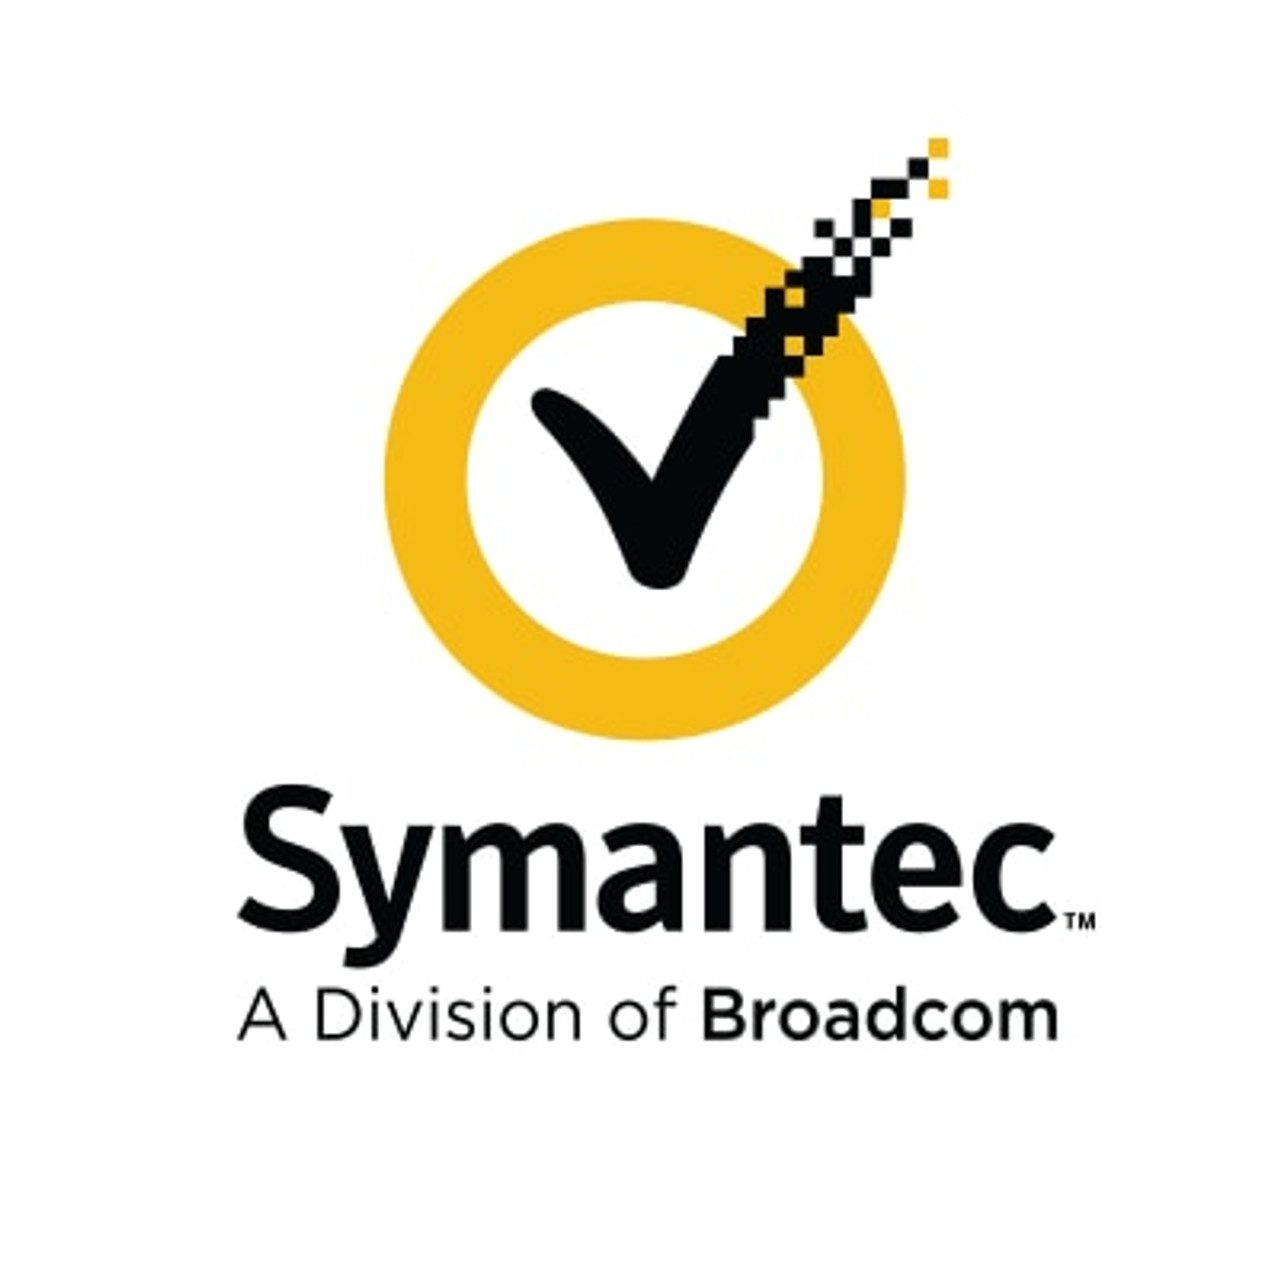 Symantec Self Managed Certificate for WSS, Trial to Production Upgrade, BC 24X7 Support, 1 year